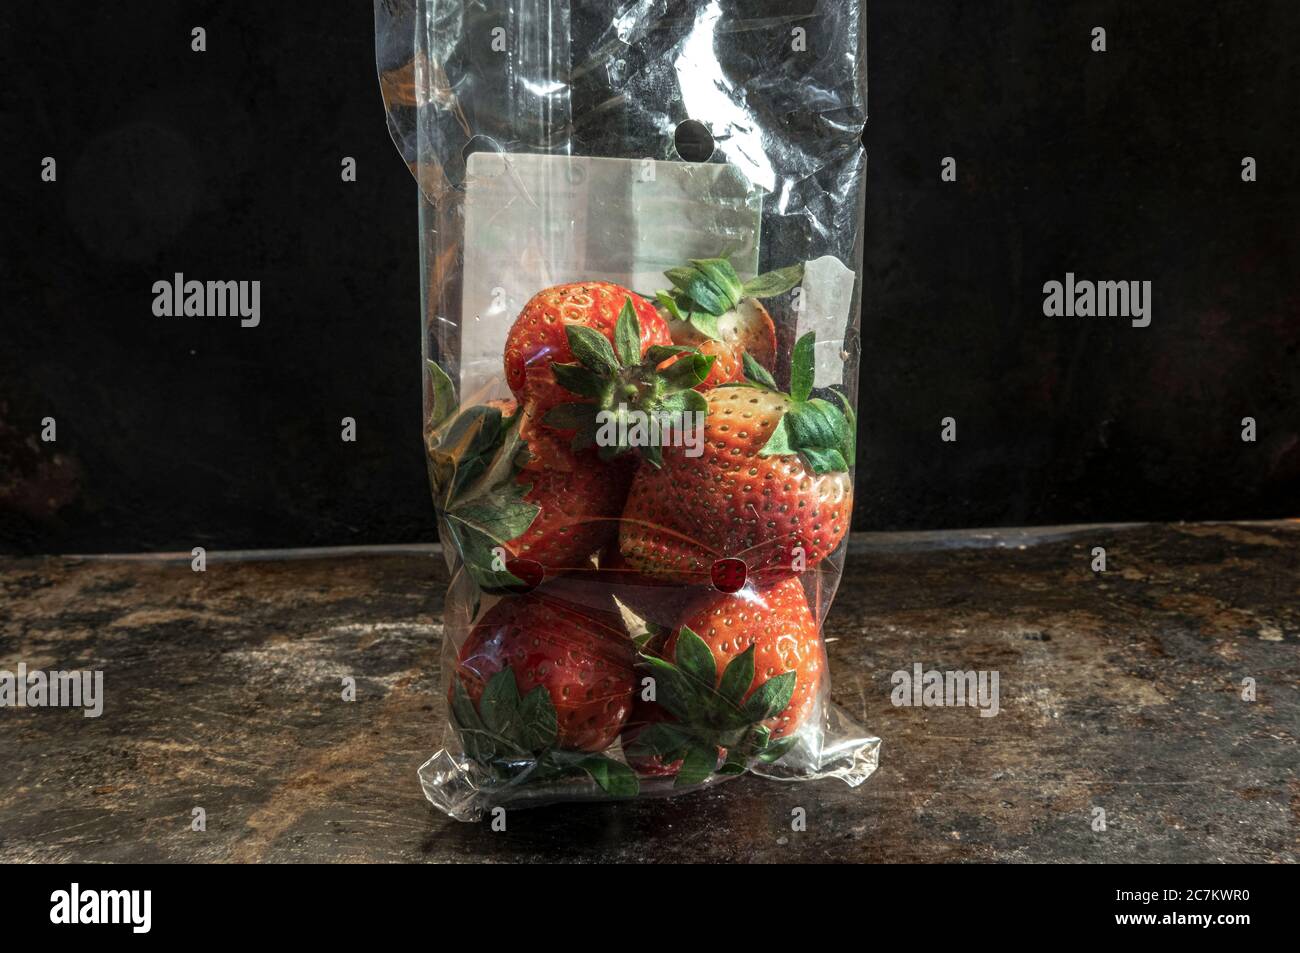 strawberrys packed in non-biodegradable plastics Stock Photo